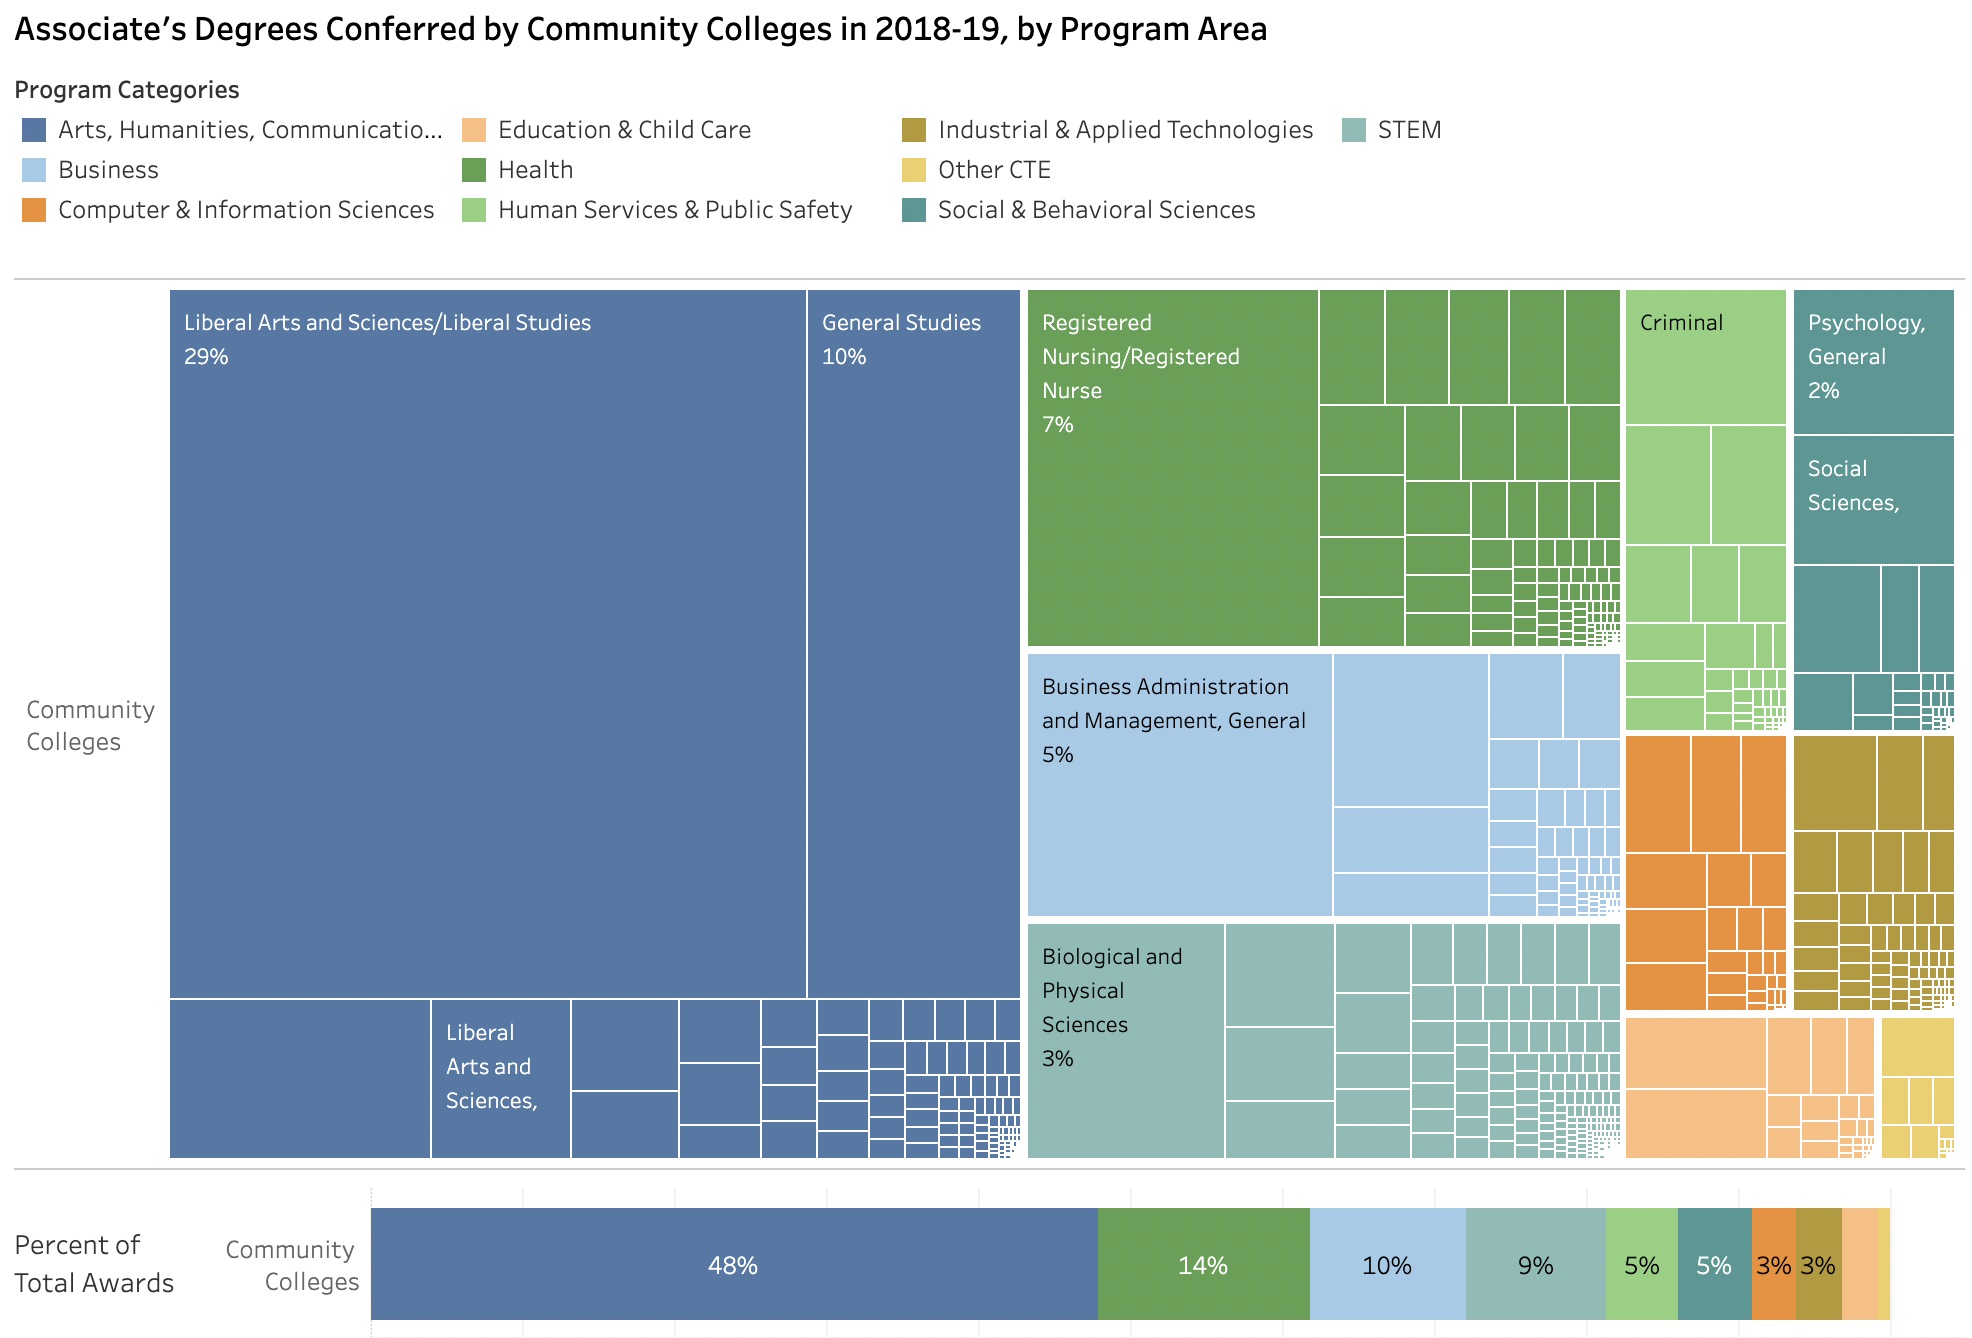 A figure depicting all of the associate's degrees awarded in 2018-19 by community colleges by program category